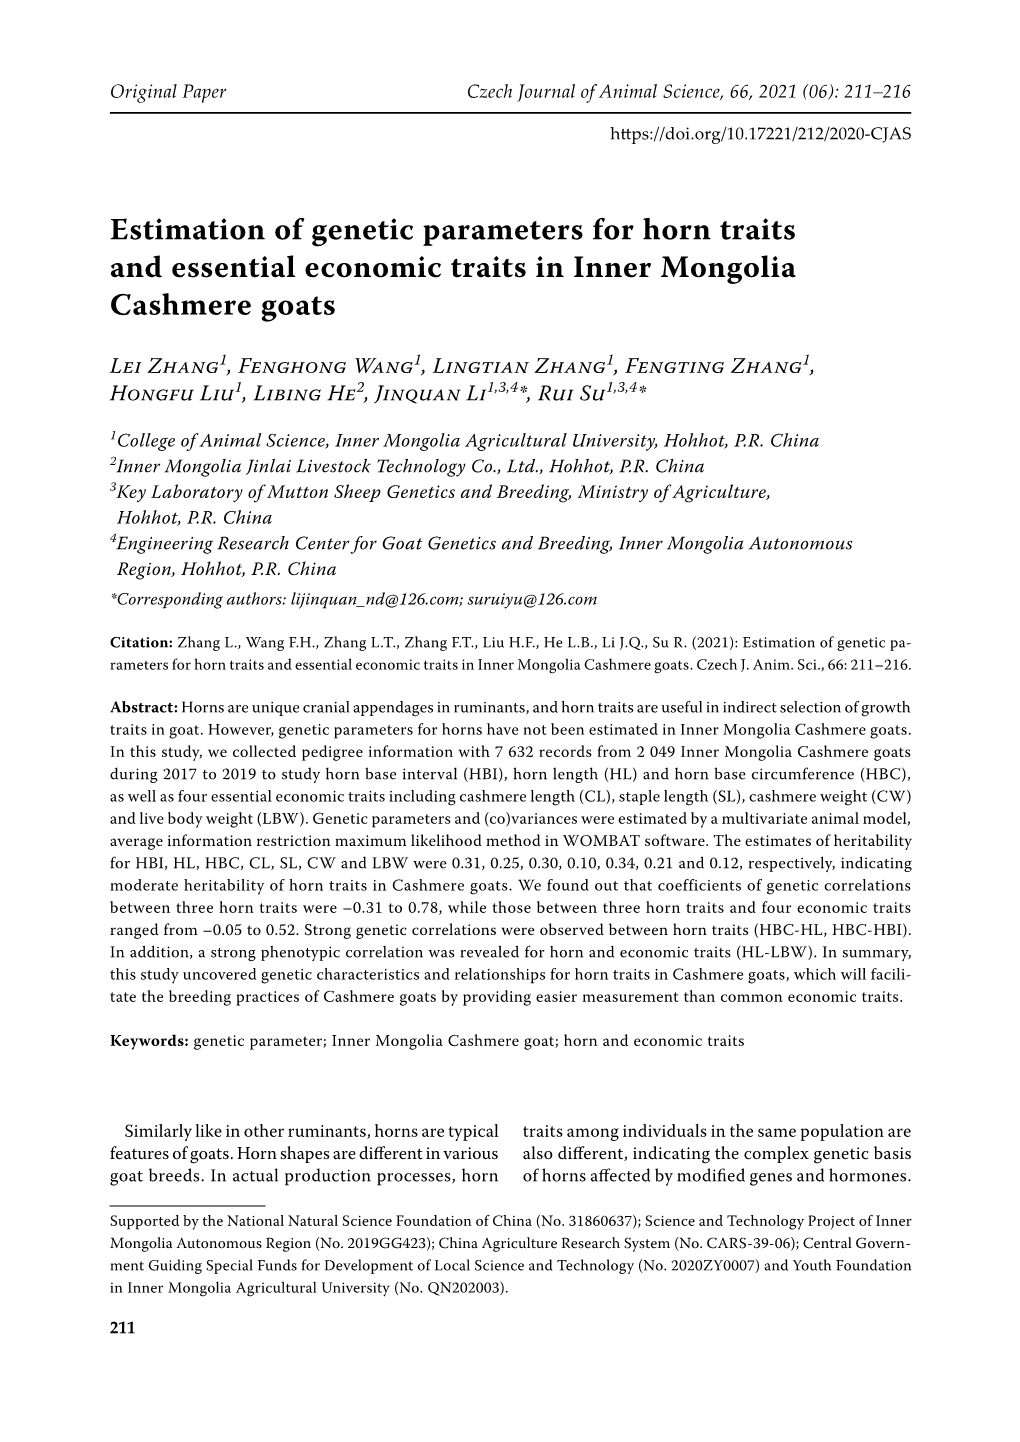 Estimation of Genetic Parameters for Horn Traits and Essential Economic Traits in Inner Mongolia Cashmere Goats